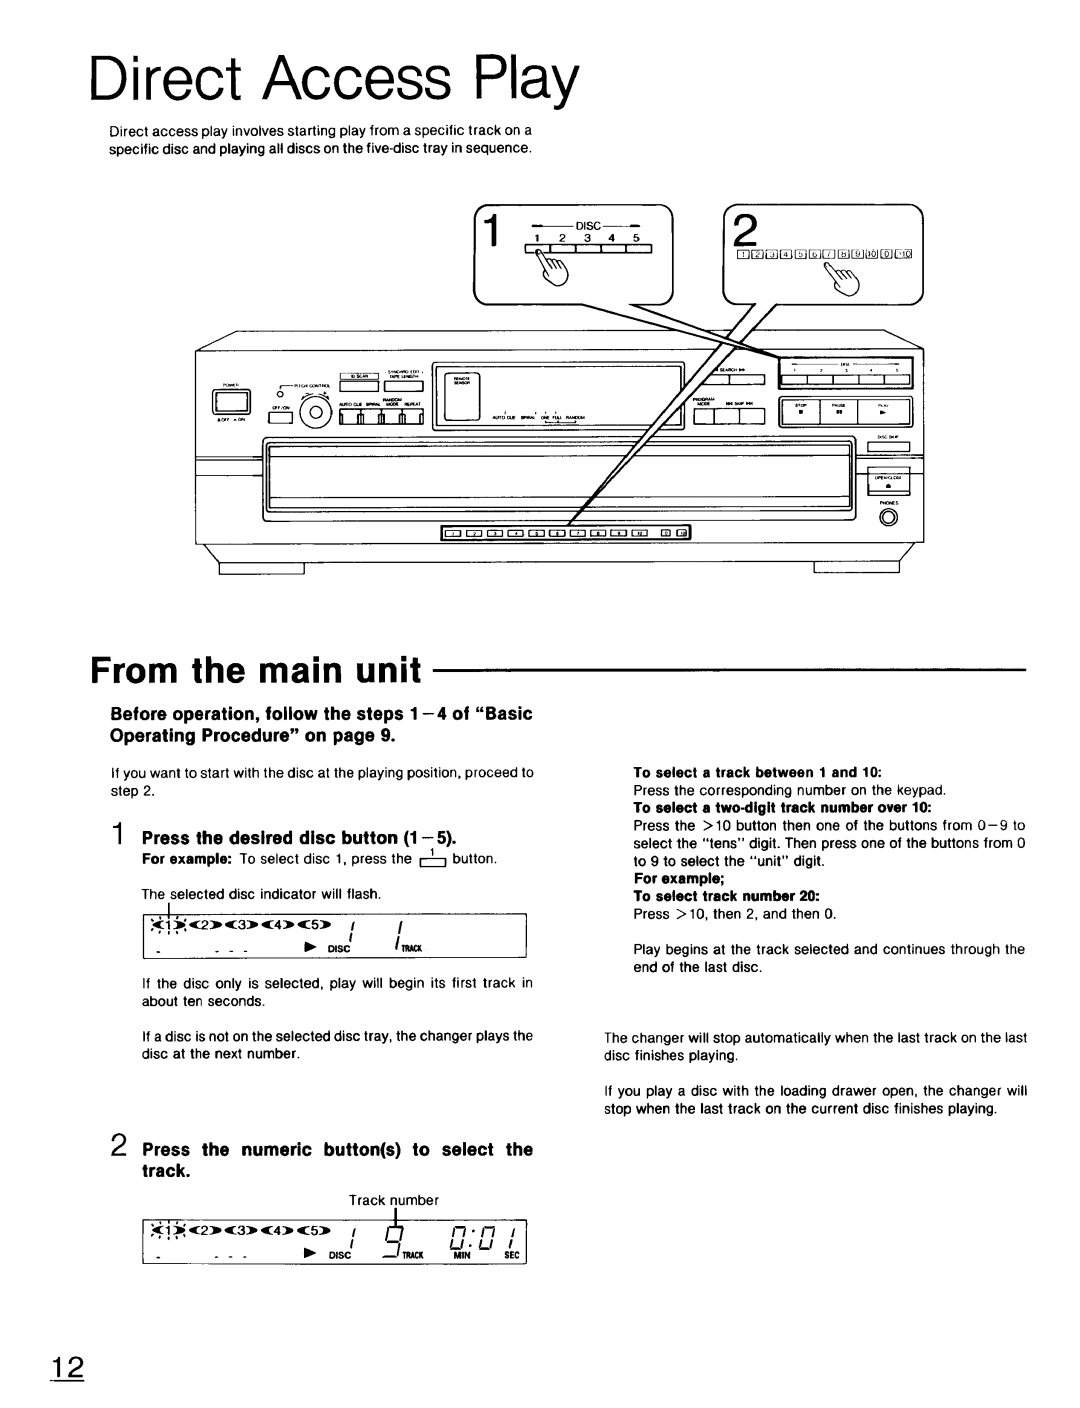 Technics SL-PD947 Direct Access Play, G g,,,-0, From the main unit, Before operation, follow the steps 1 -4of Basic 